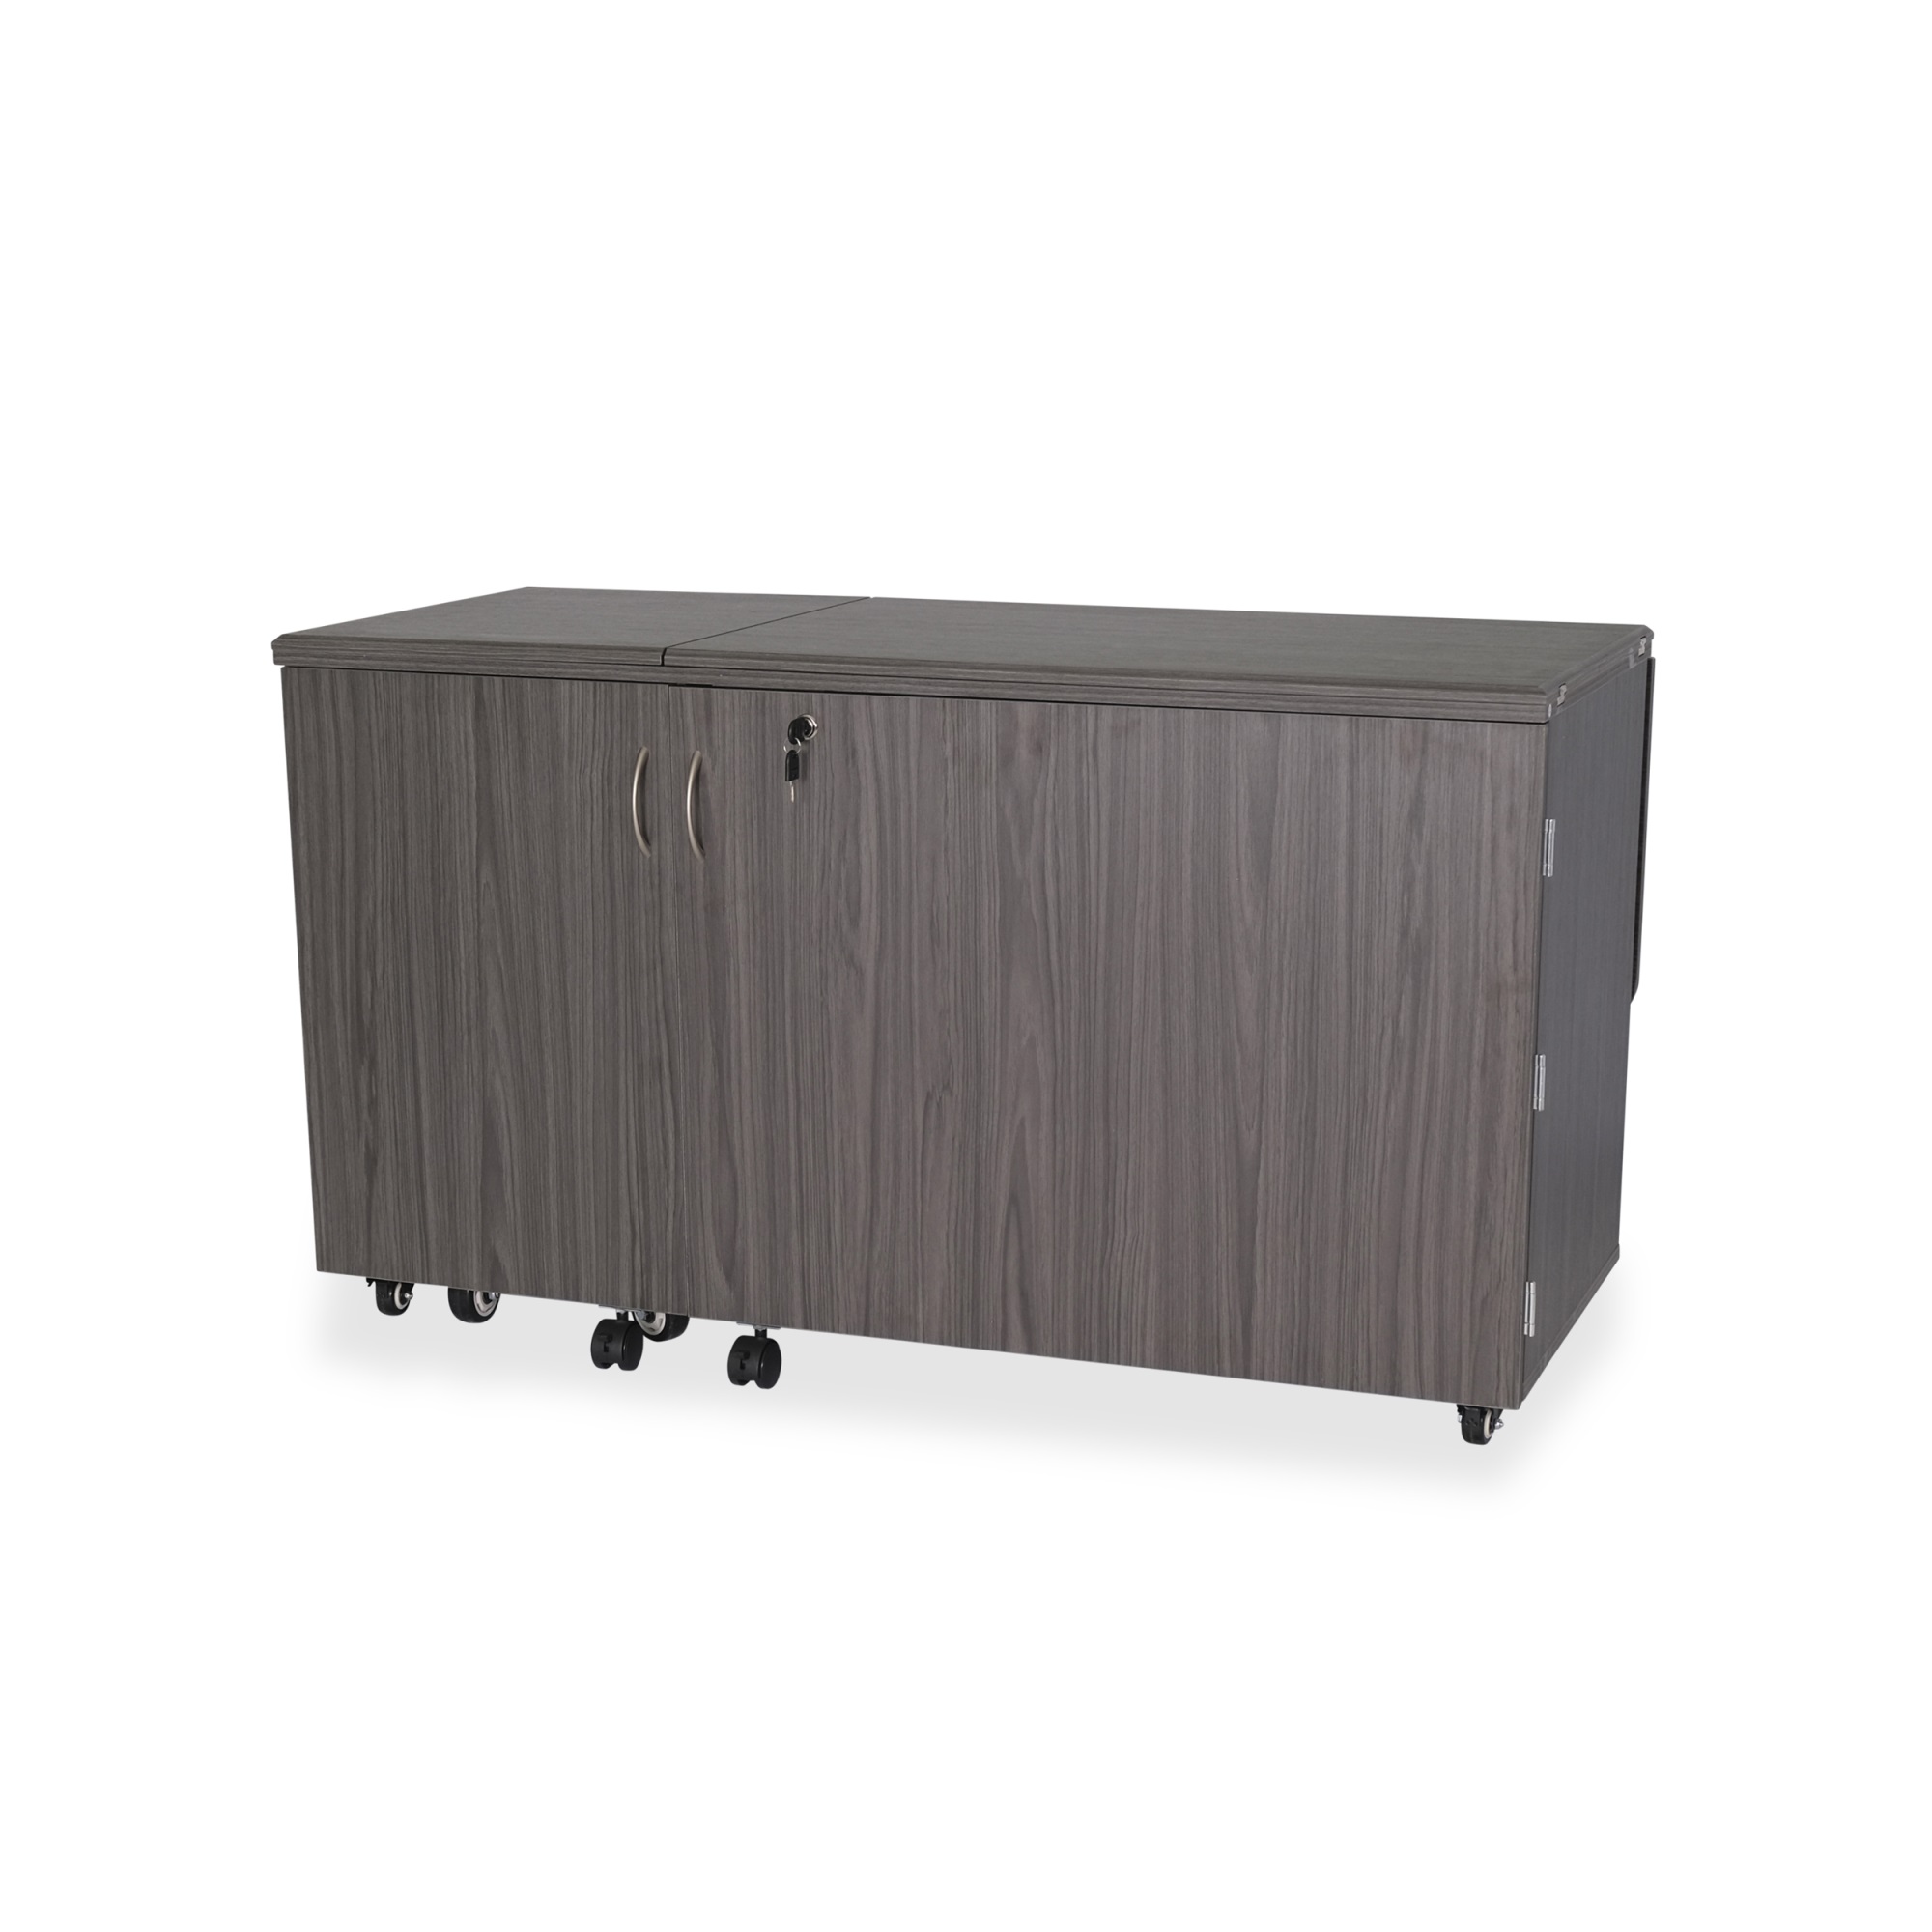 Arrow Kangaroo Sewing Furniture Outback XL Sewing Cabinet - Gray